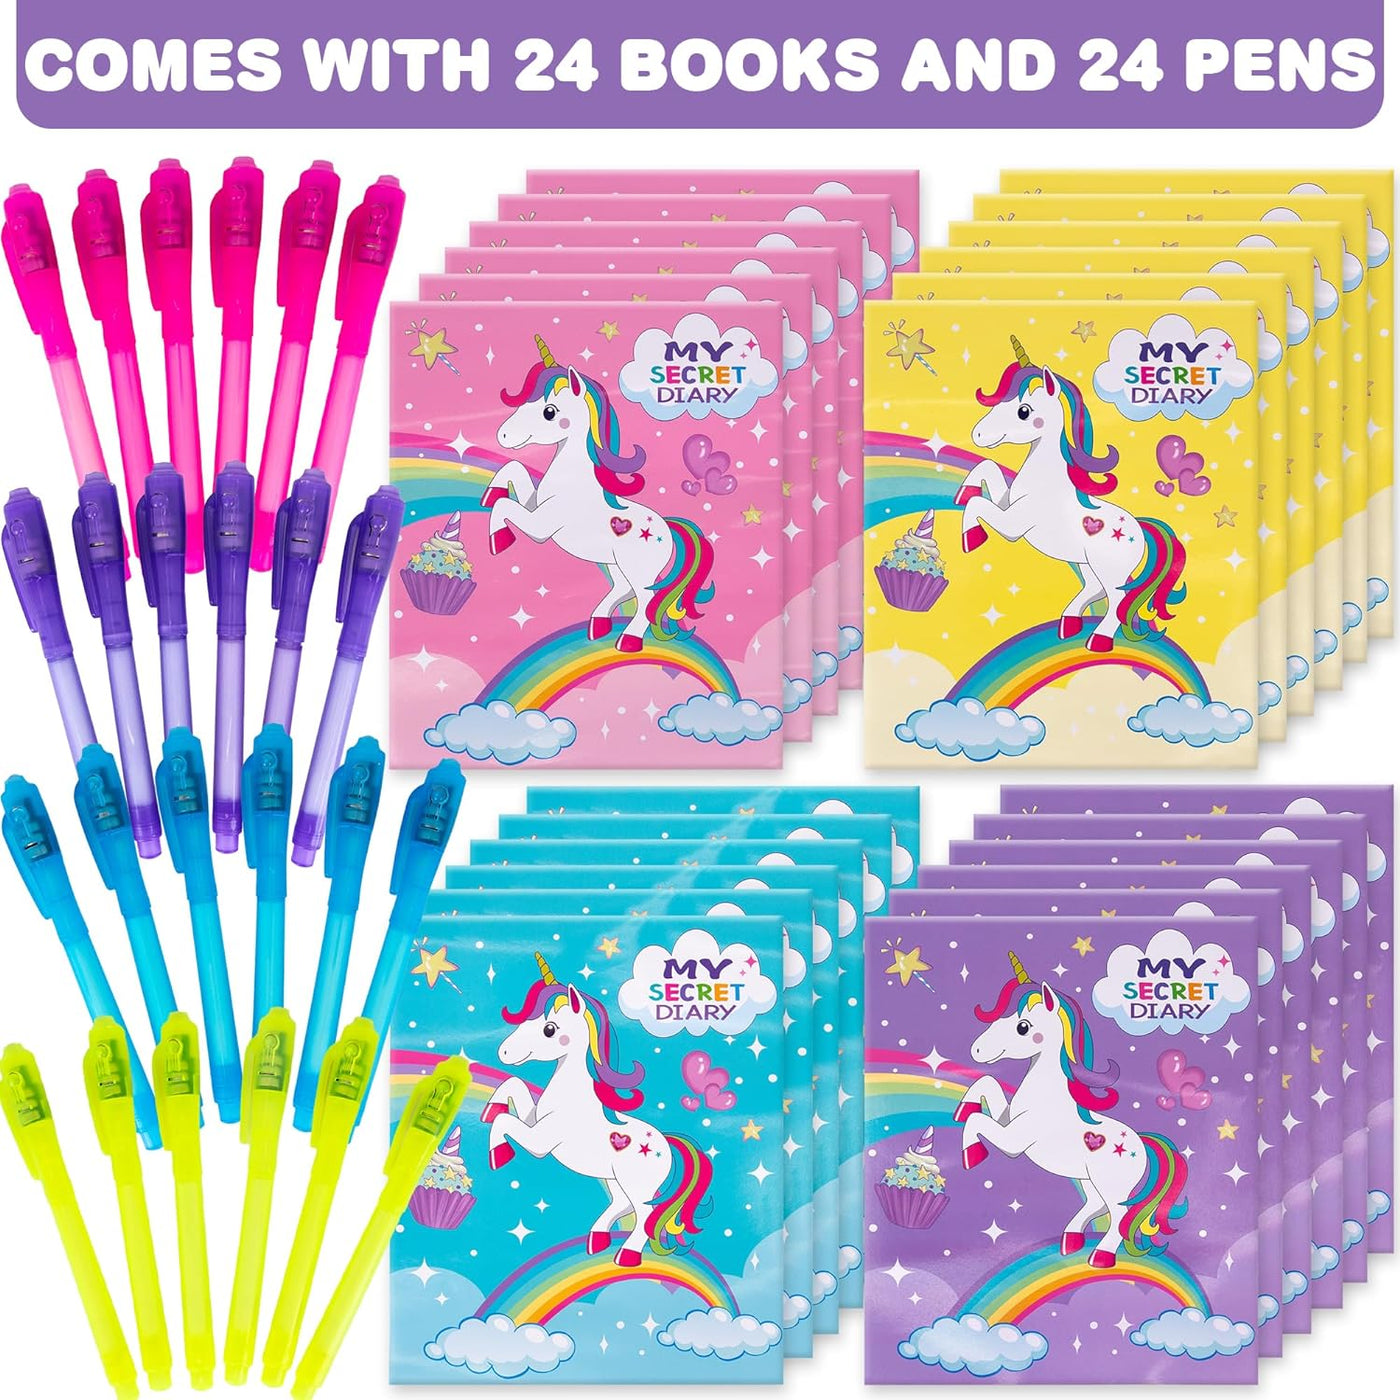 ArtCreativity Invisible Ink Pen & Notepad Kit - 24 Sets Unicorn Gifts for Girls with UV Light Pens and Secret Diary Notebooks - Unicorn Birthday Party Favors - Cute Stationery for Kids